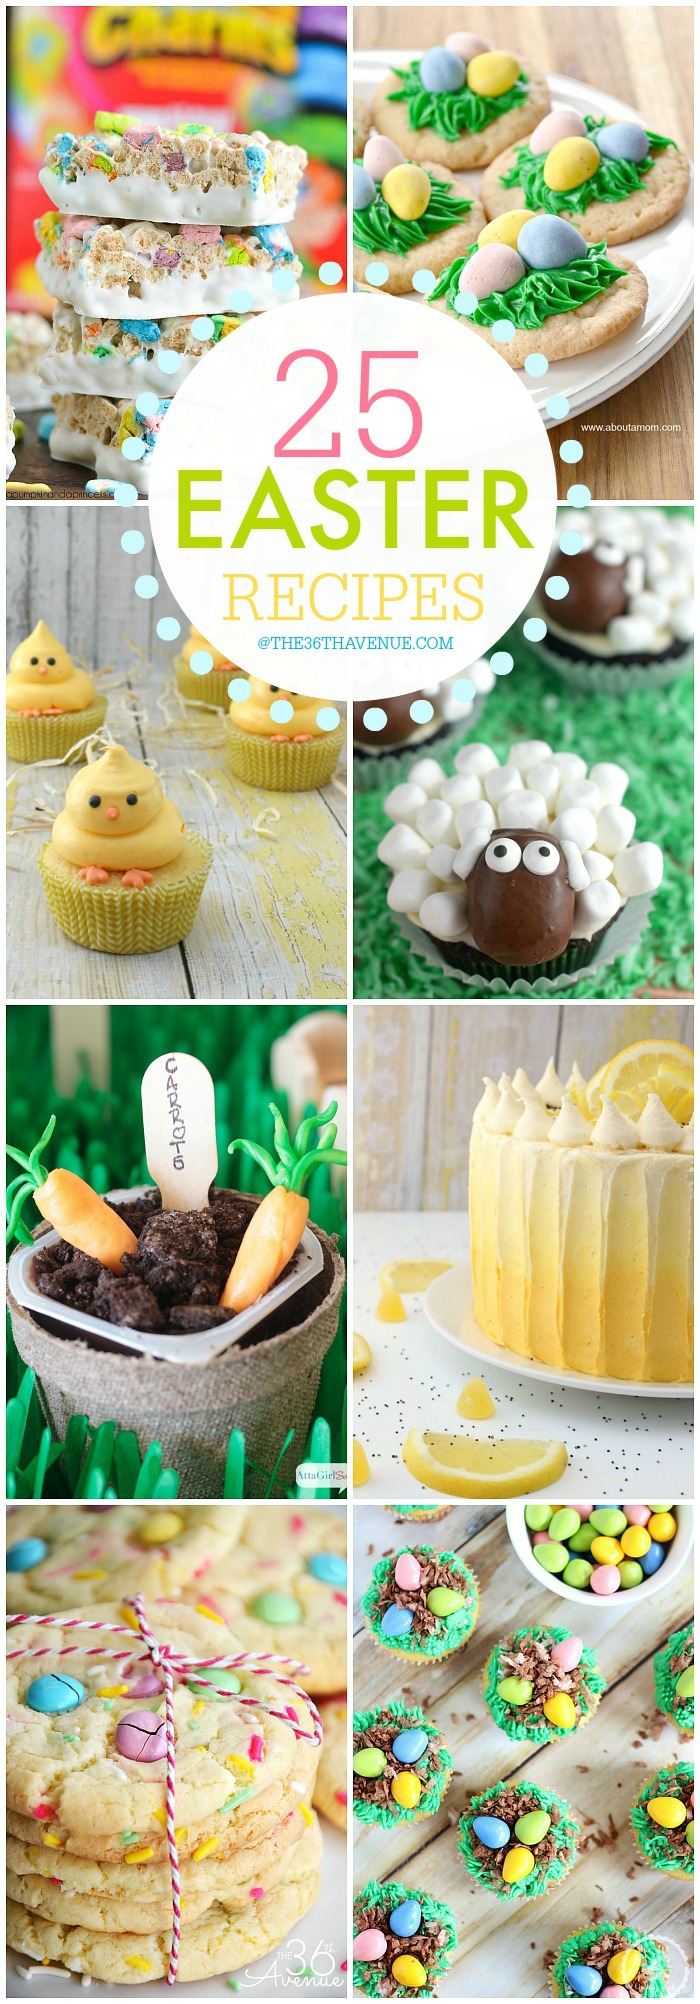 Easter Recipes at the36thavenue.com Pin it now and make them later!